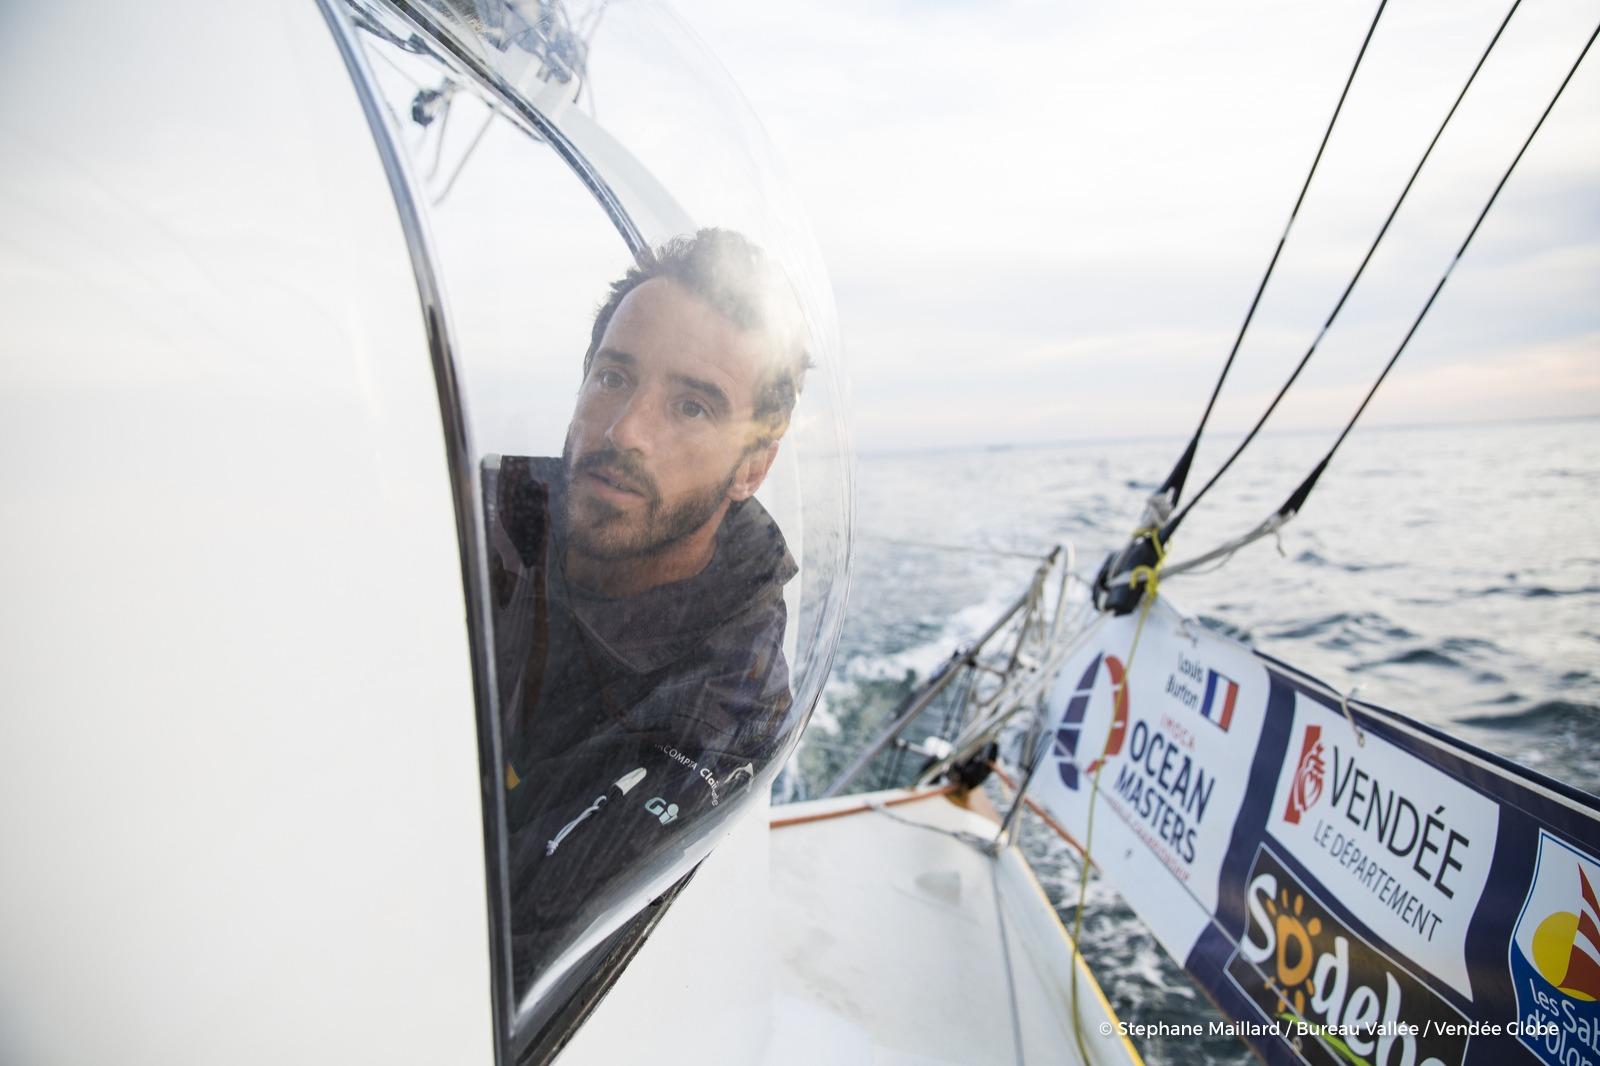 The Vendée Globe's final 5,000 miles are set to be a Cliffhanger